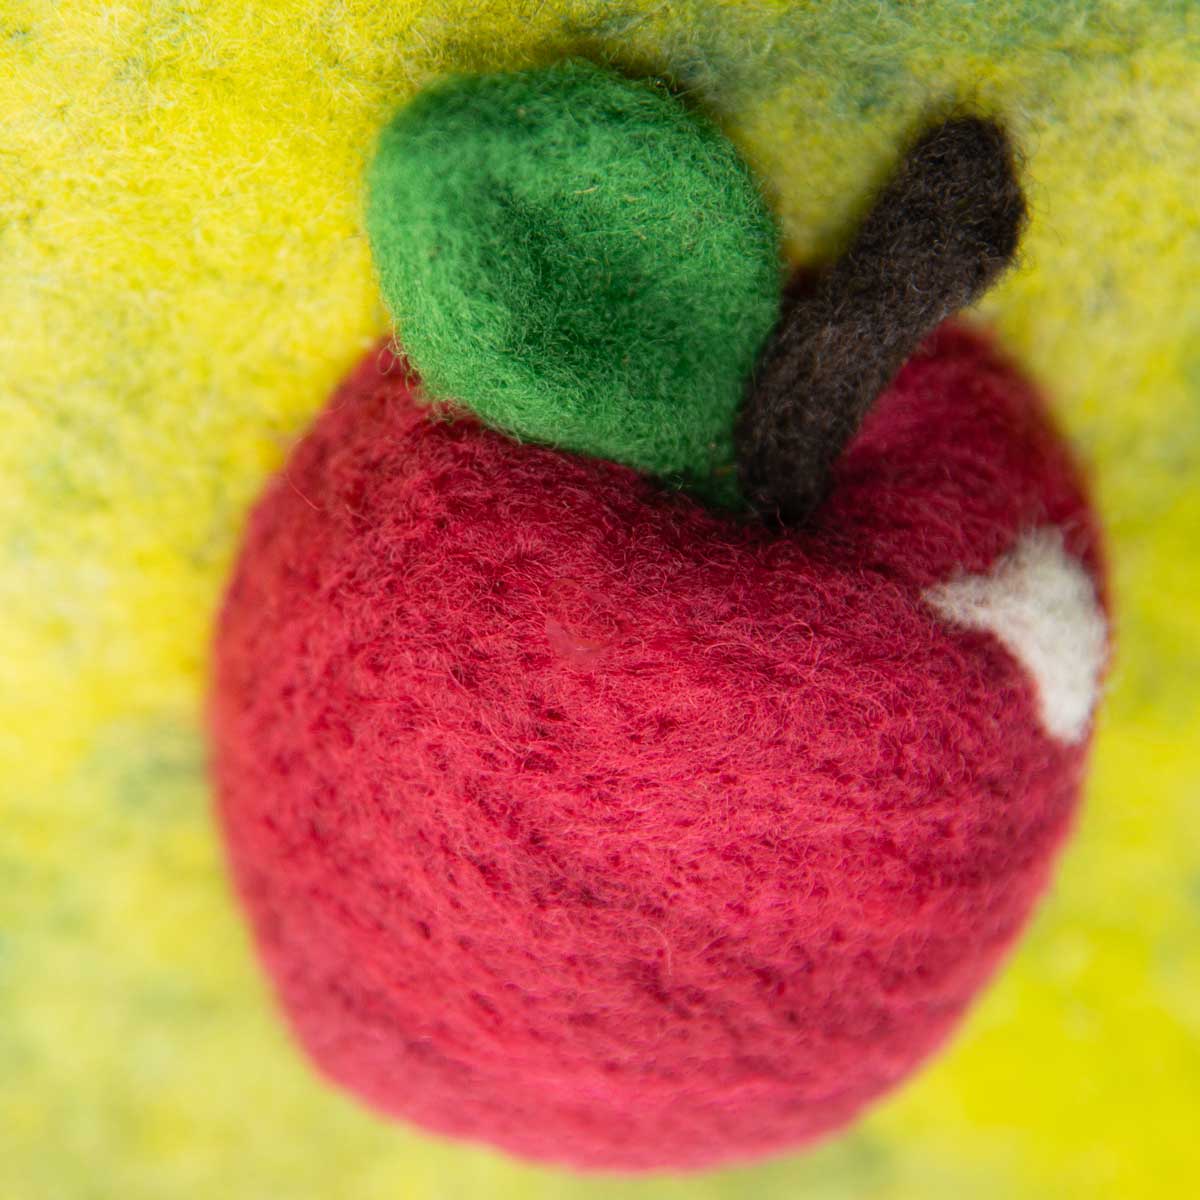 Apple - Needle Felted Illustration for Hillary Dow's ABC picture book